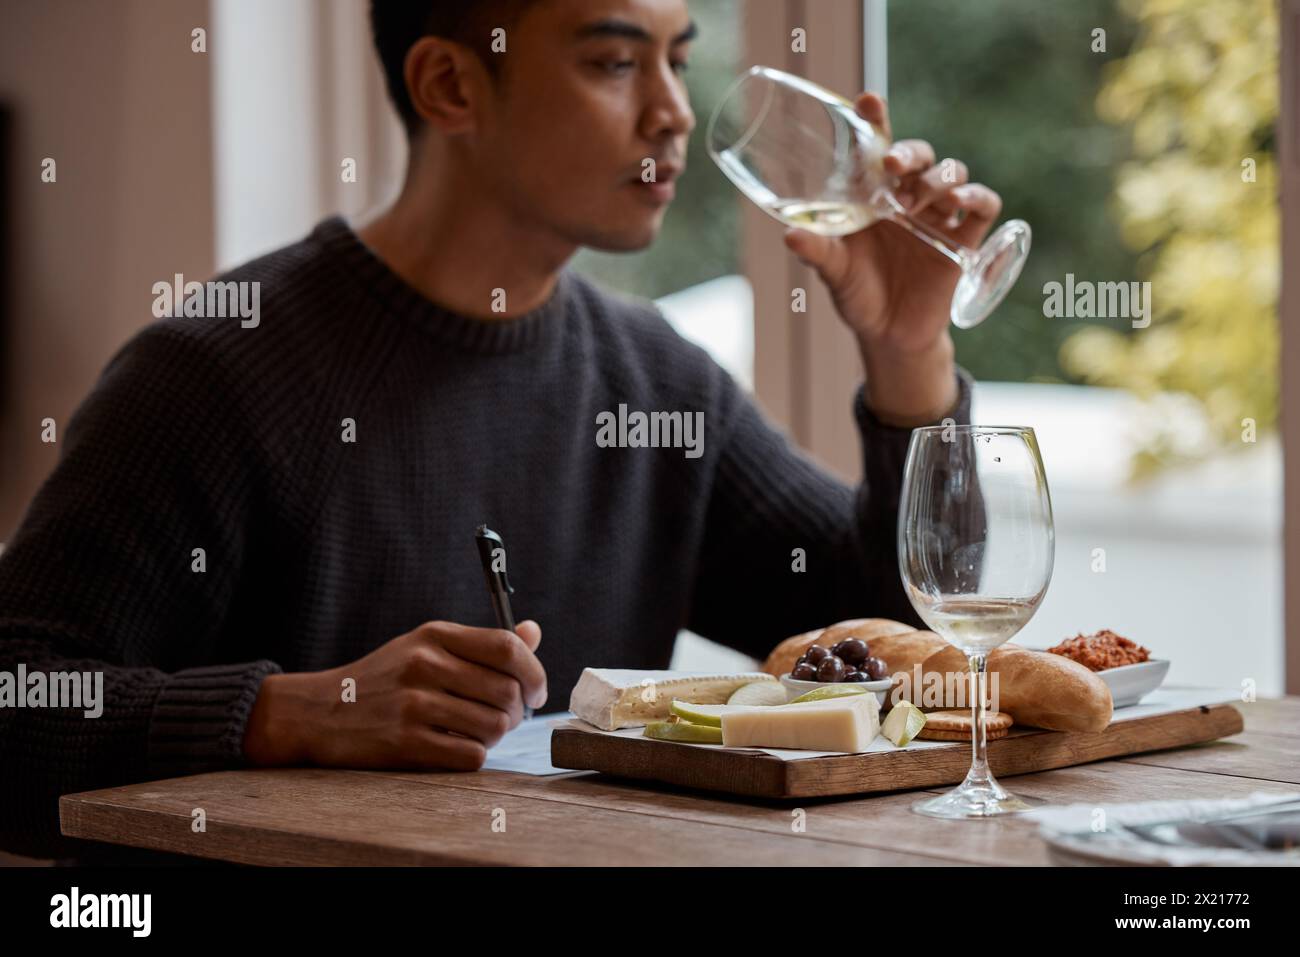 Drinking, eating and restaurant with asian man food critic writing notes for review as customer. Cheese platter, glass and wine with consumer person Stock Photo